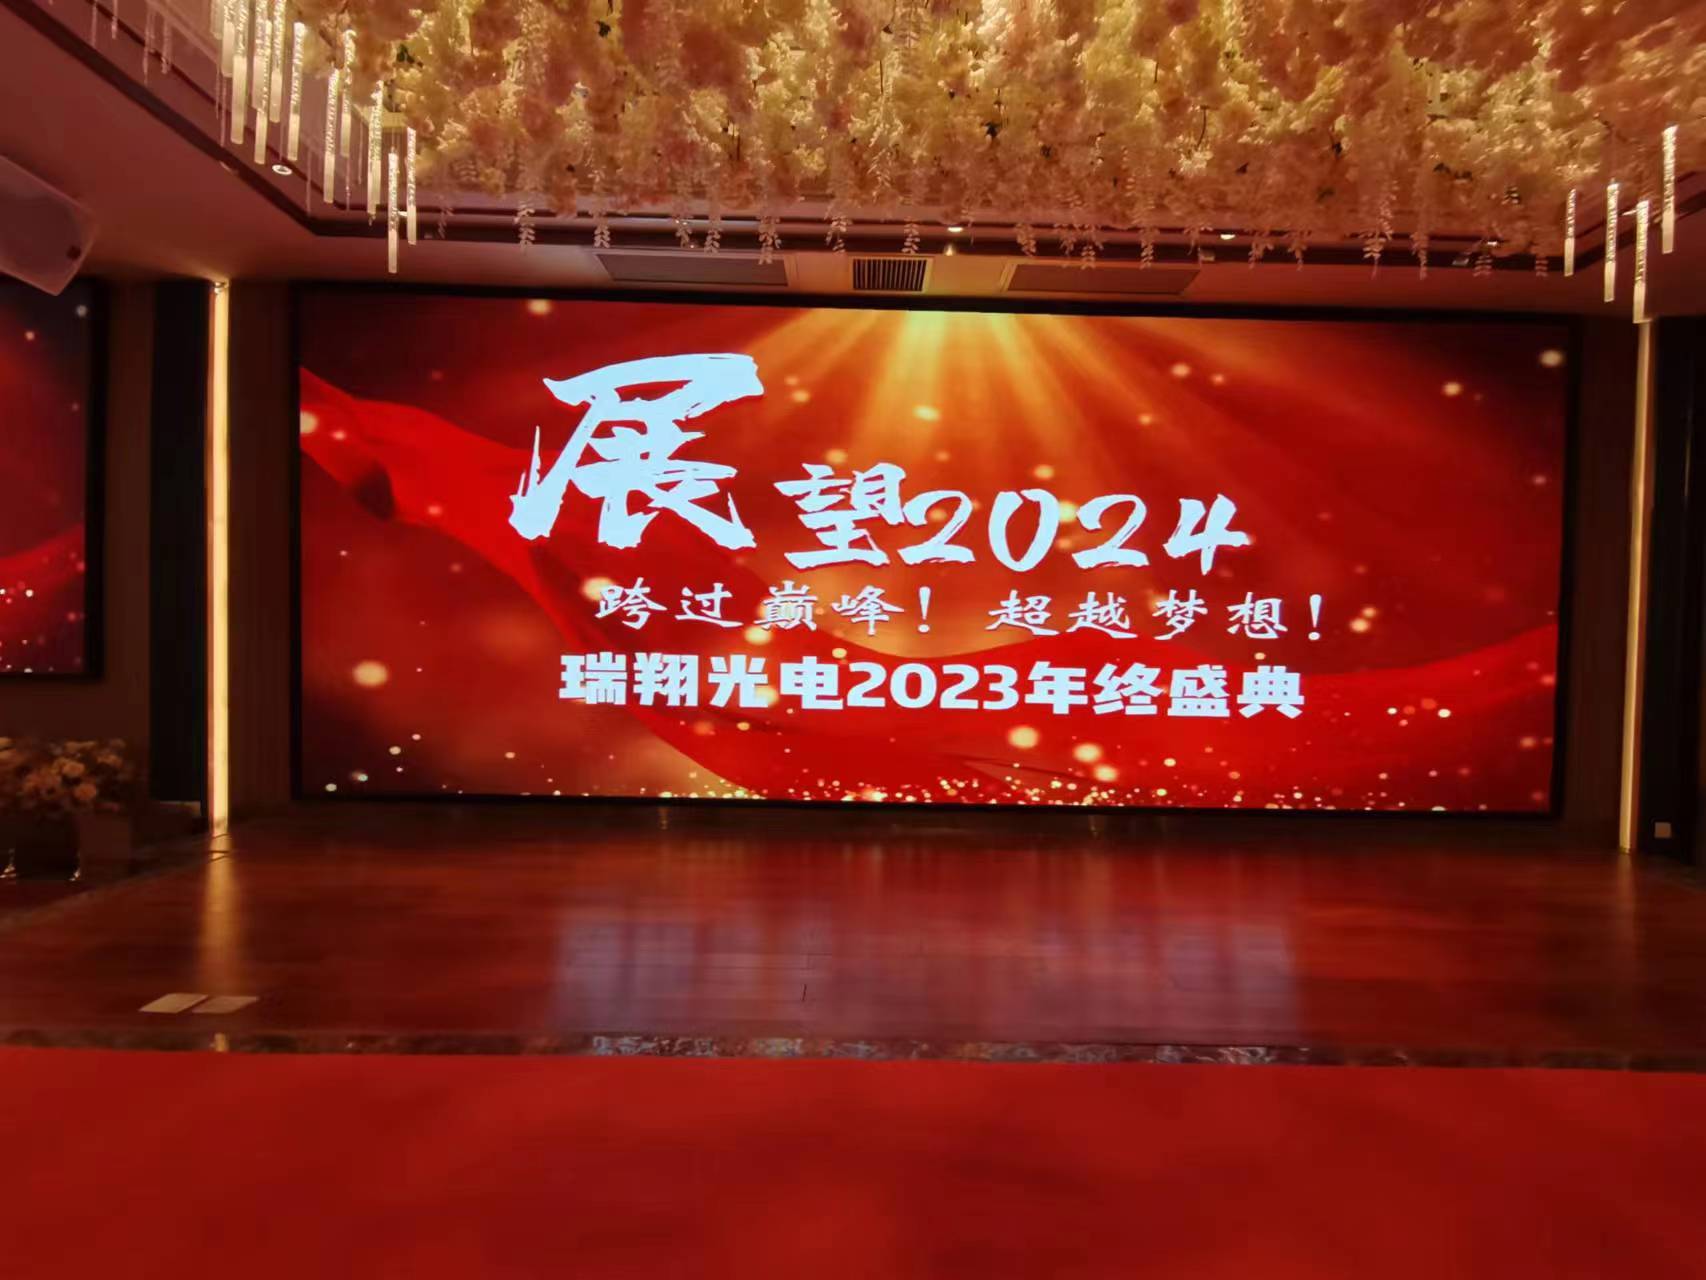 Ruixiang 2023 year-end party for all employees